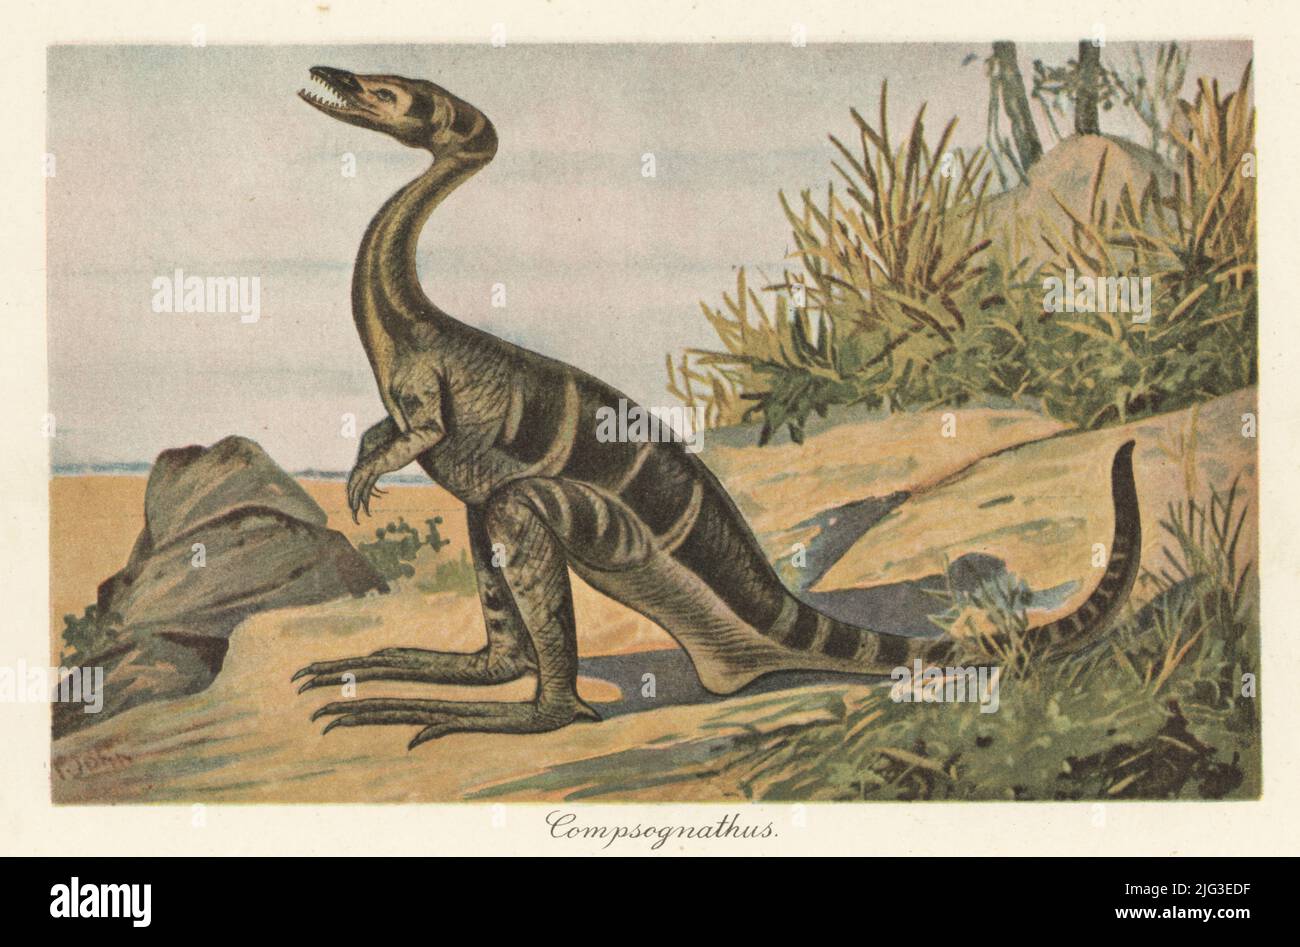 Reconstruction of a Compsognathus longipes, small, bipedal, carnivorous theropod dinosaur of the Jurassic. Colour printed illustration by F. John from Wilhelm Bolsche’s Tiere der Urwelt (Animals of the Prehistoric World), Reichardt Cocoa company, Hamburg, 1908. Stock Photo